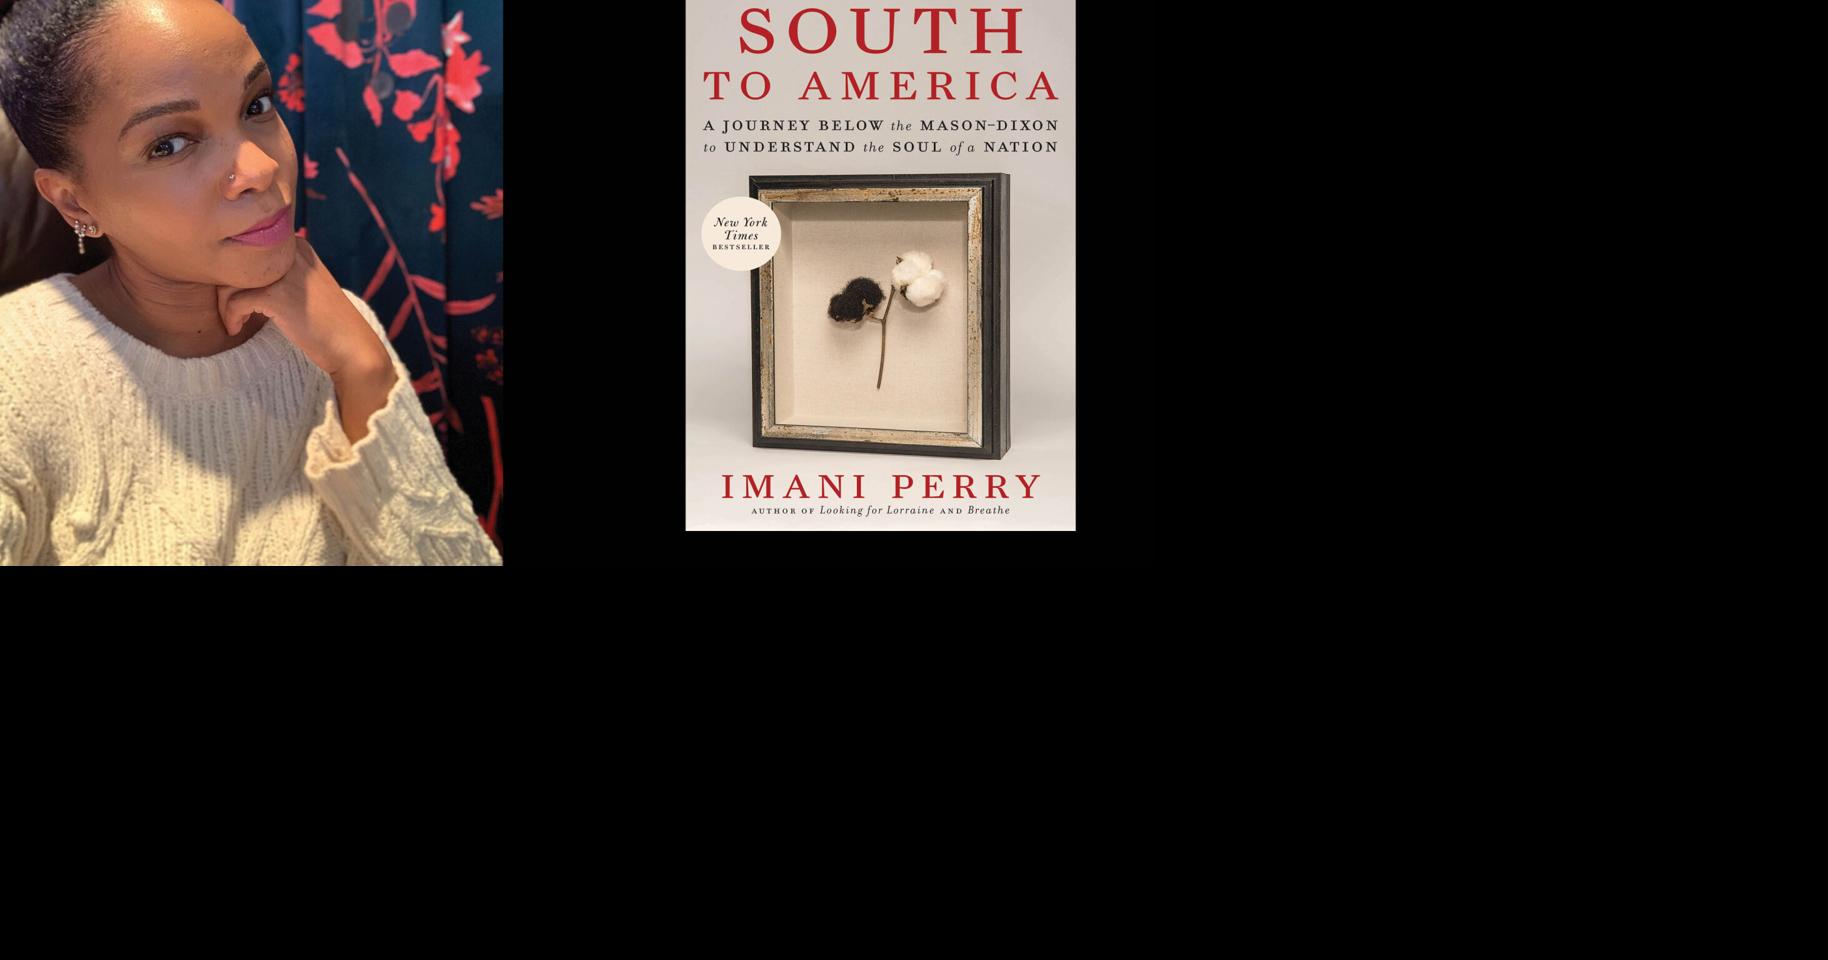 Imani Perry Explores the South's Centrality to the American Story